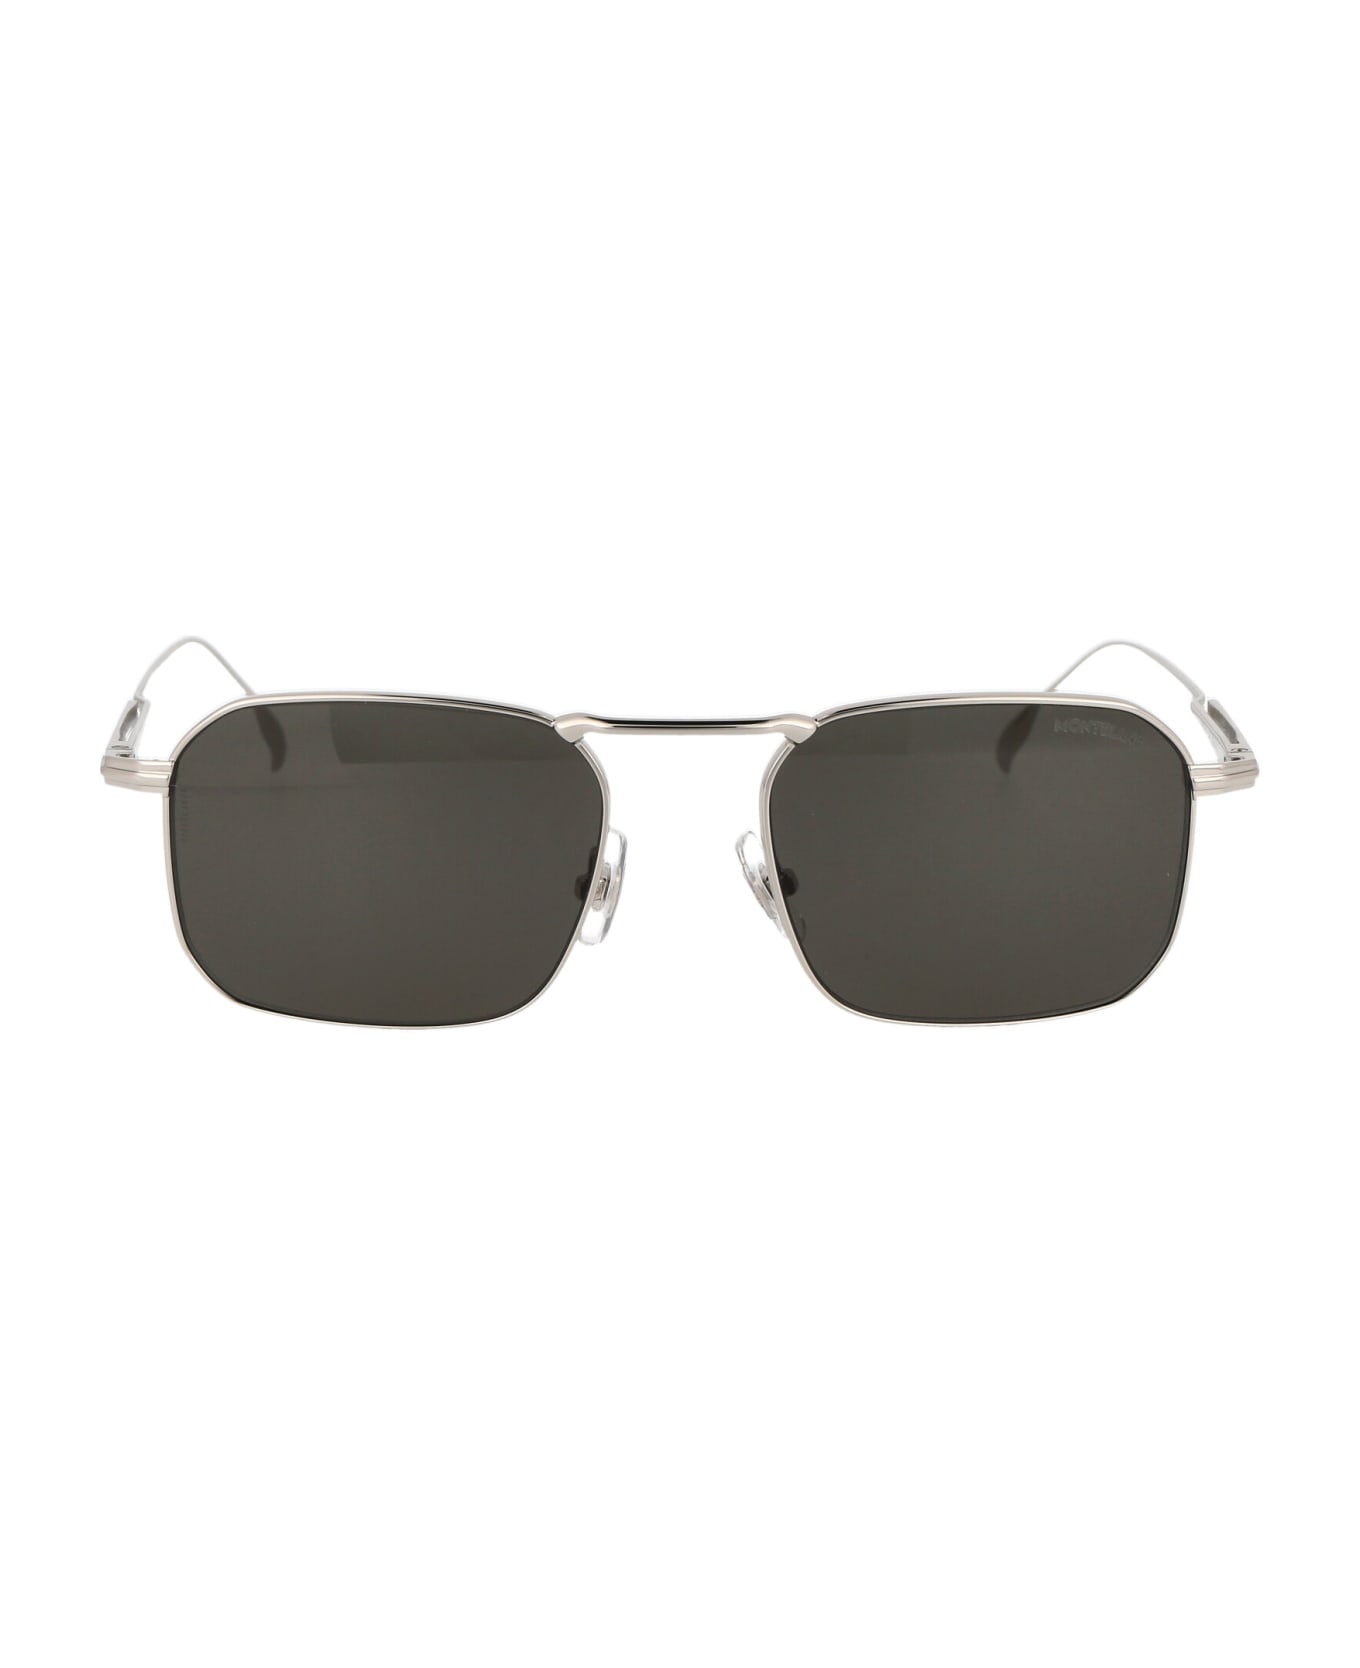 Montblanc Mb0218s Sunglasses - 001 SILVER SILVER GREY